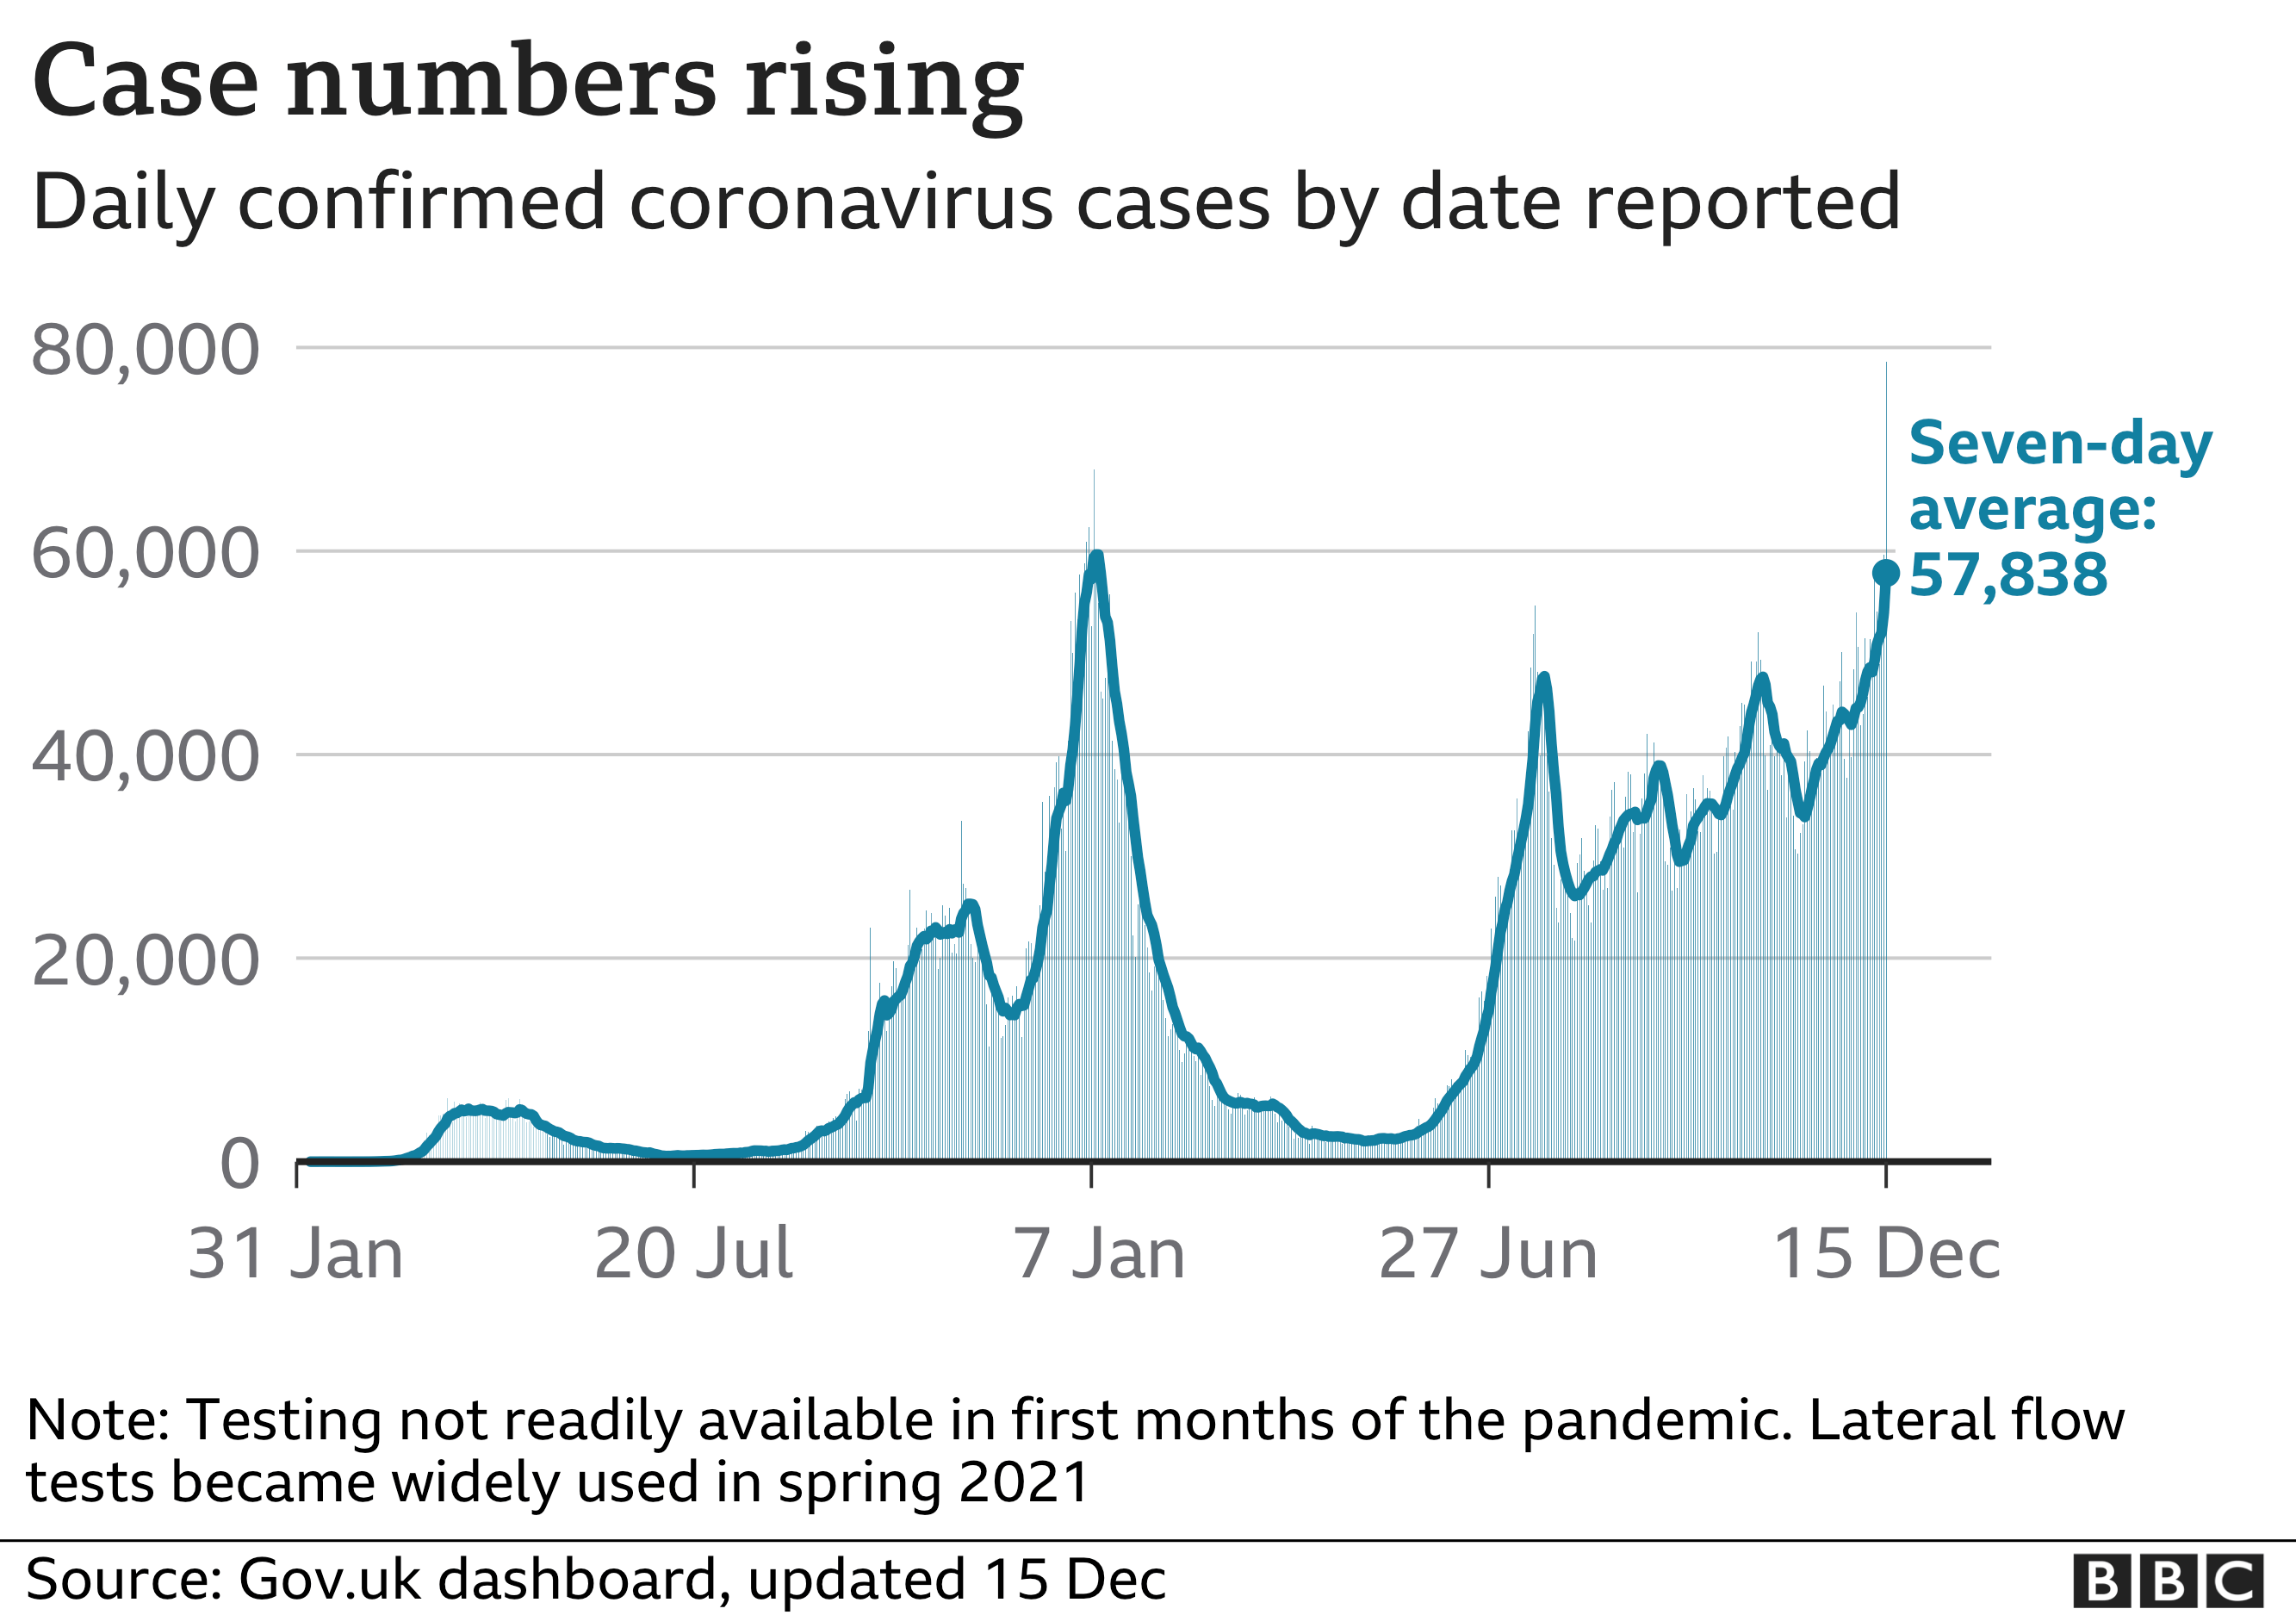 Chart showing that the number of daily cases is rising in the UK